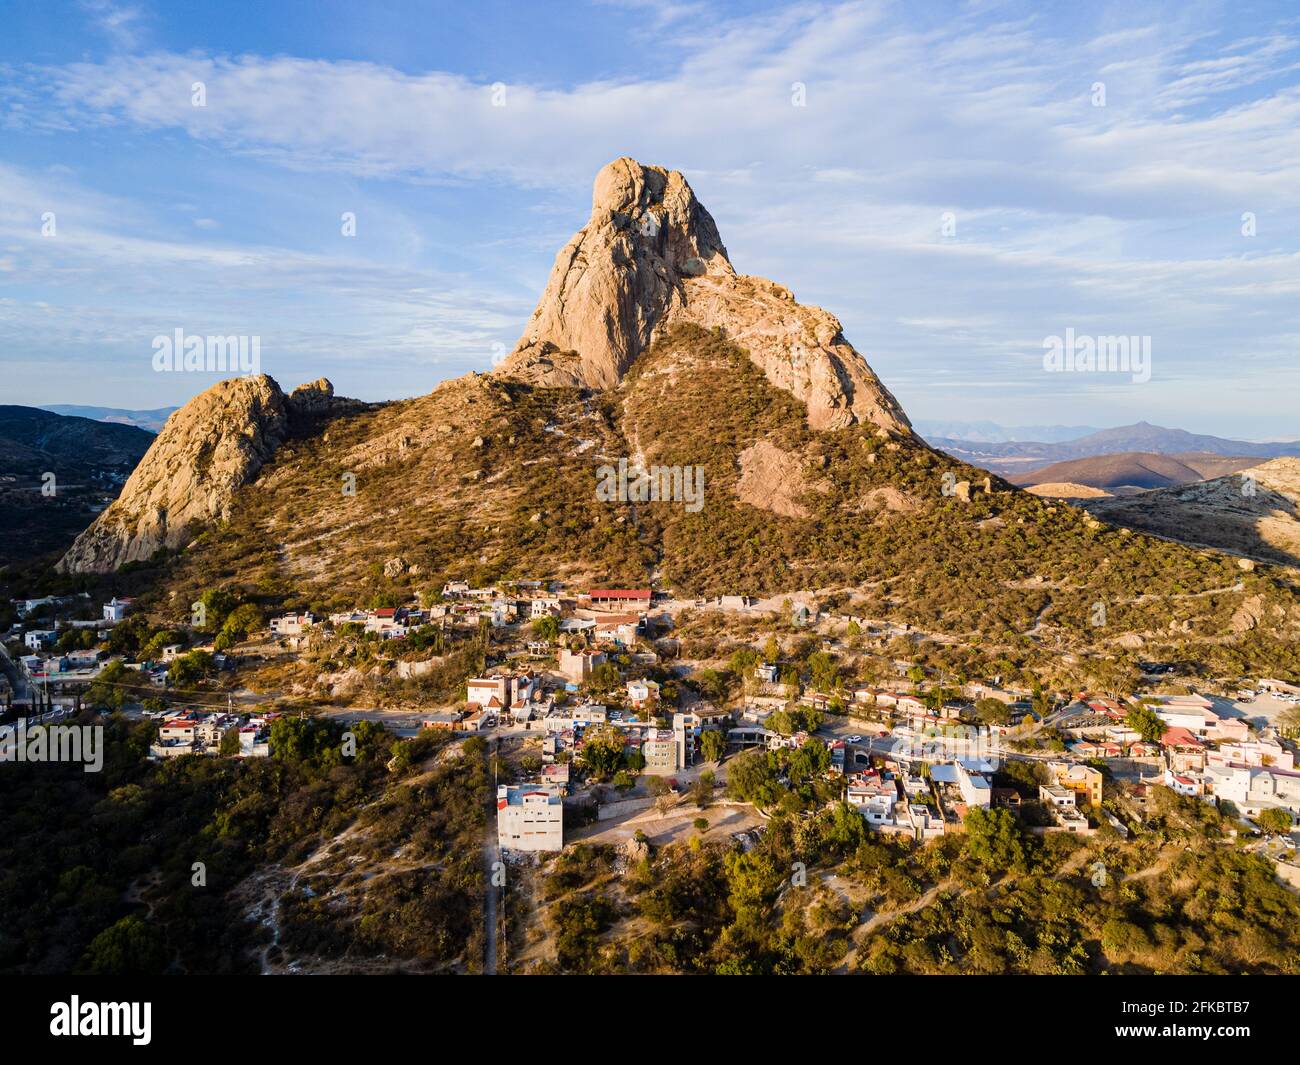 Aerial of El Bernal, third largest monolith in the world, Queretaro, Mexico, North America Stock Photo